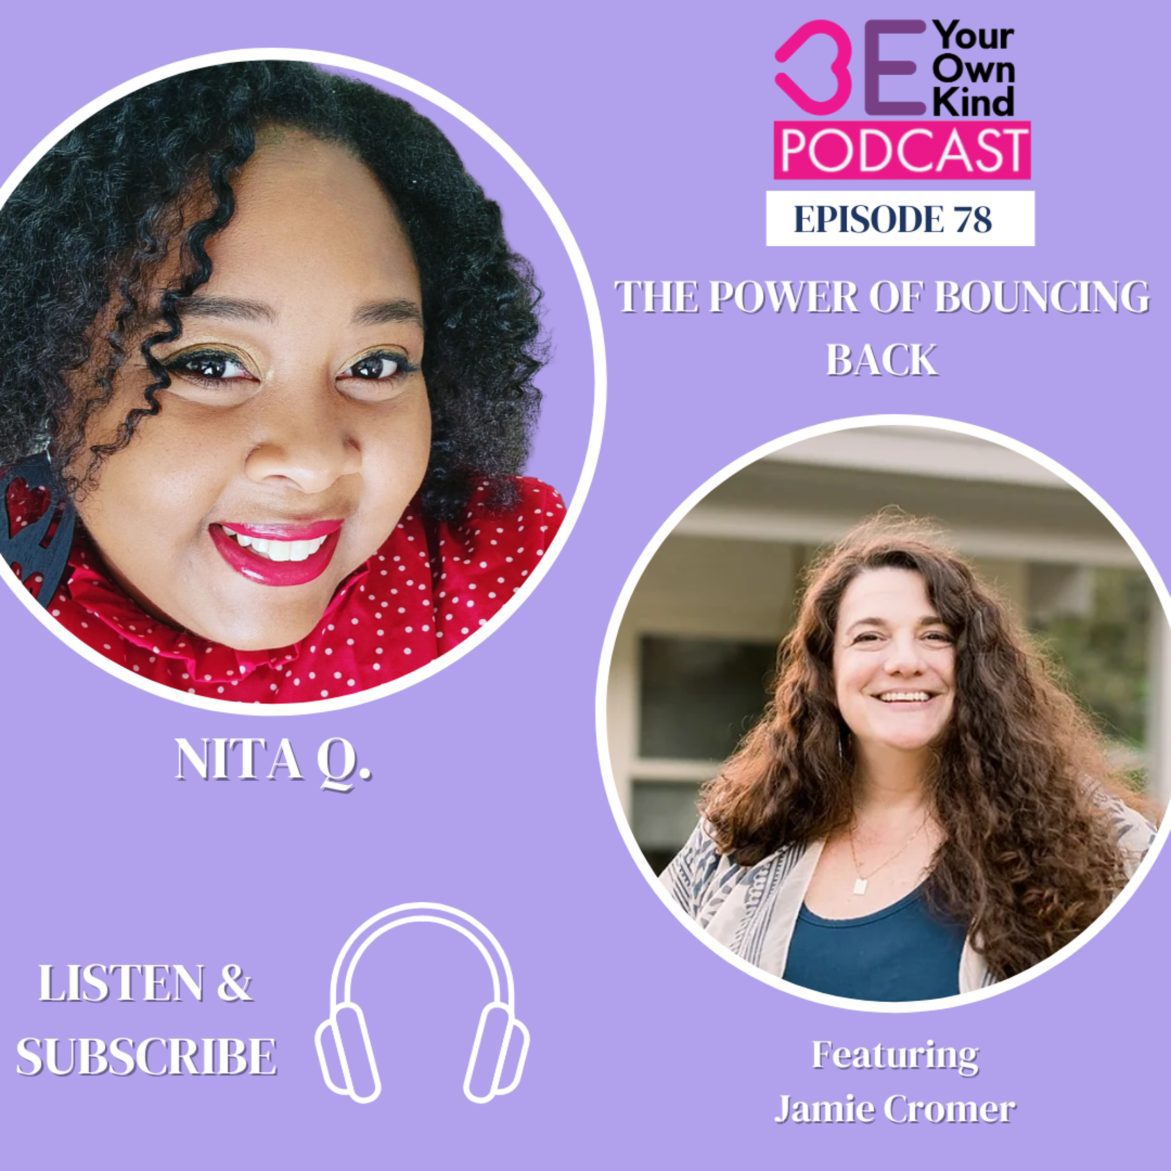 Black Podcasting - EP 78: BYOK w/ Jamie Cromer: The Power of Bouncing Back